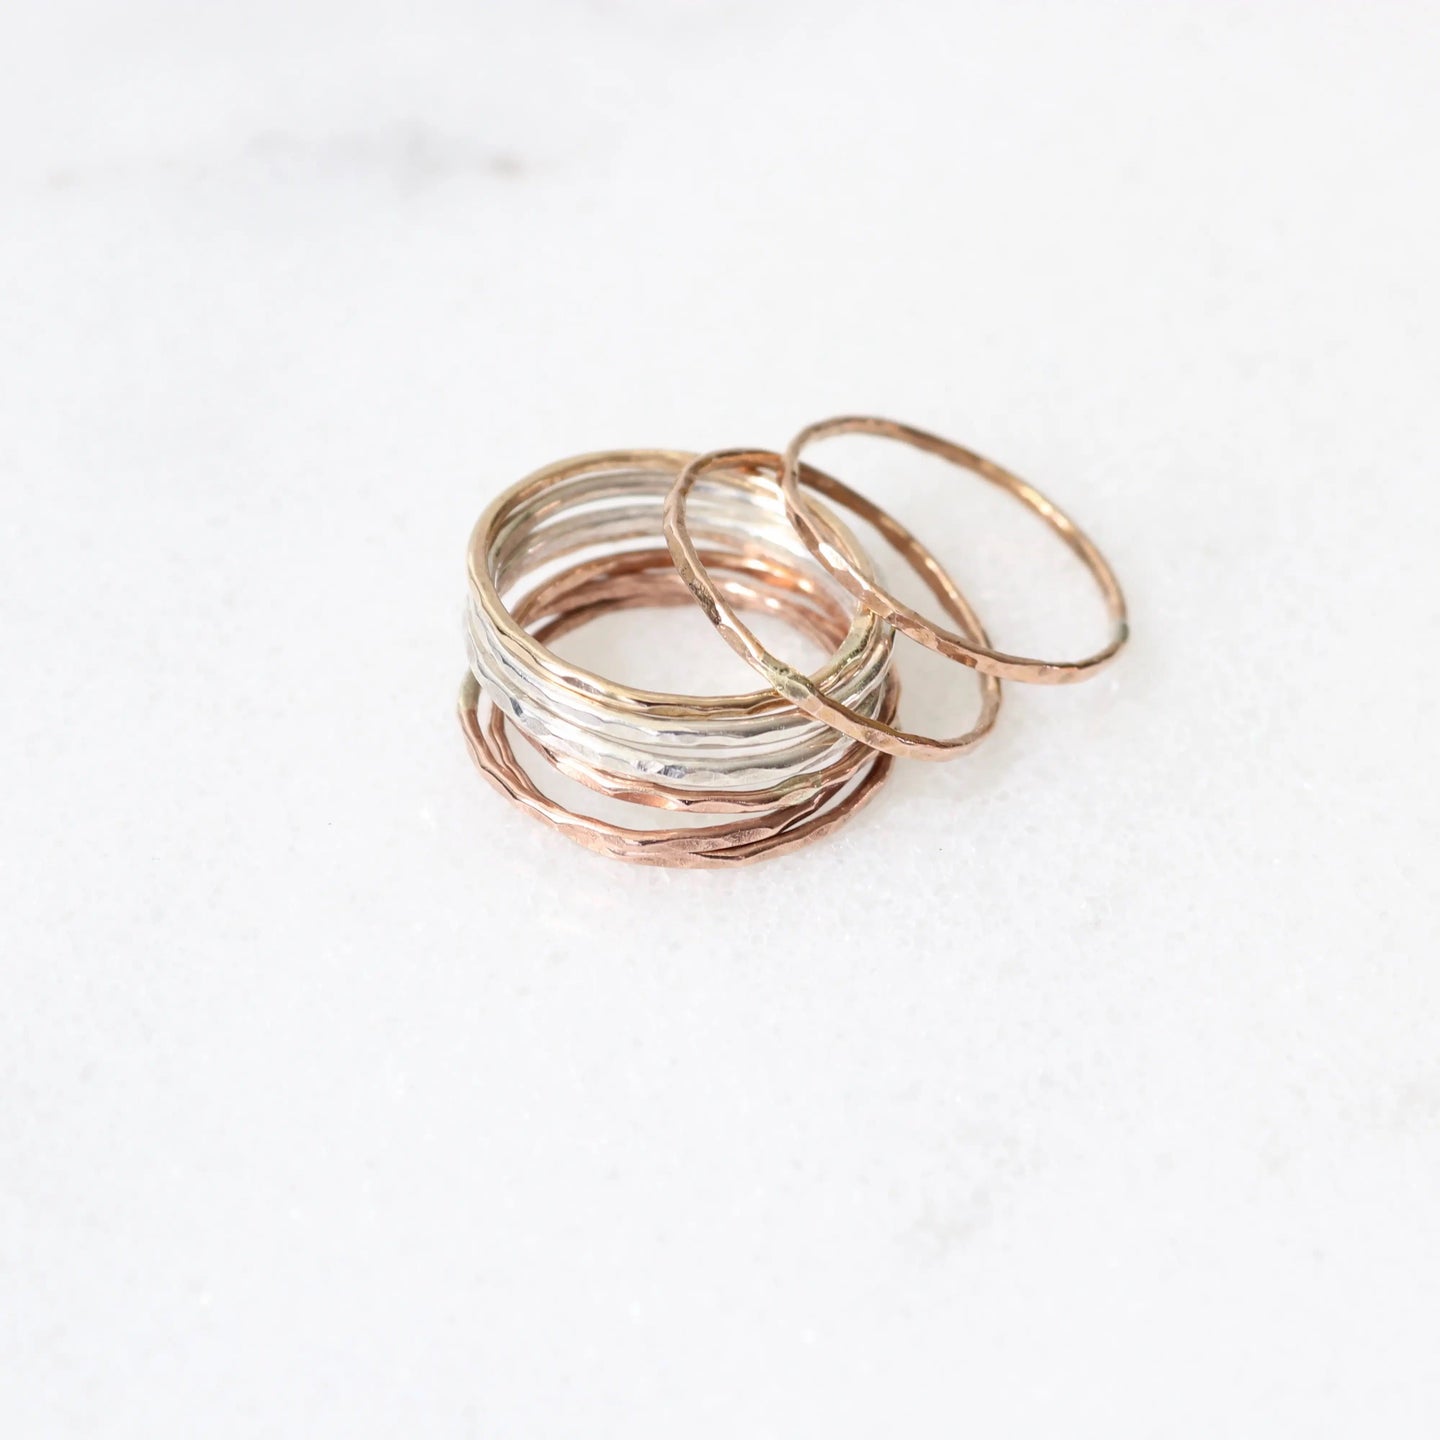 Stacking Rings in Silver, Gold, and Rose Gold x Hammered / Sterling Silver